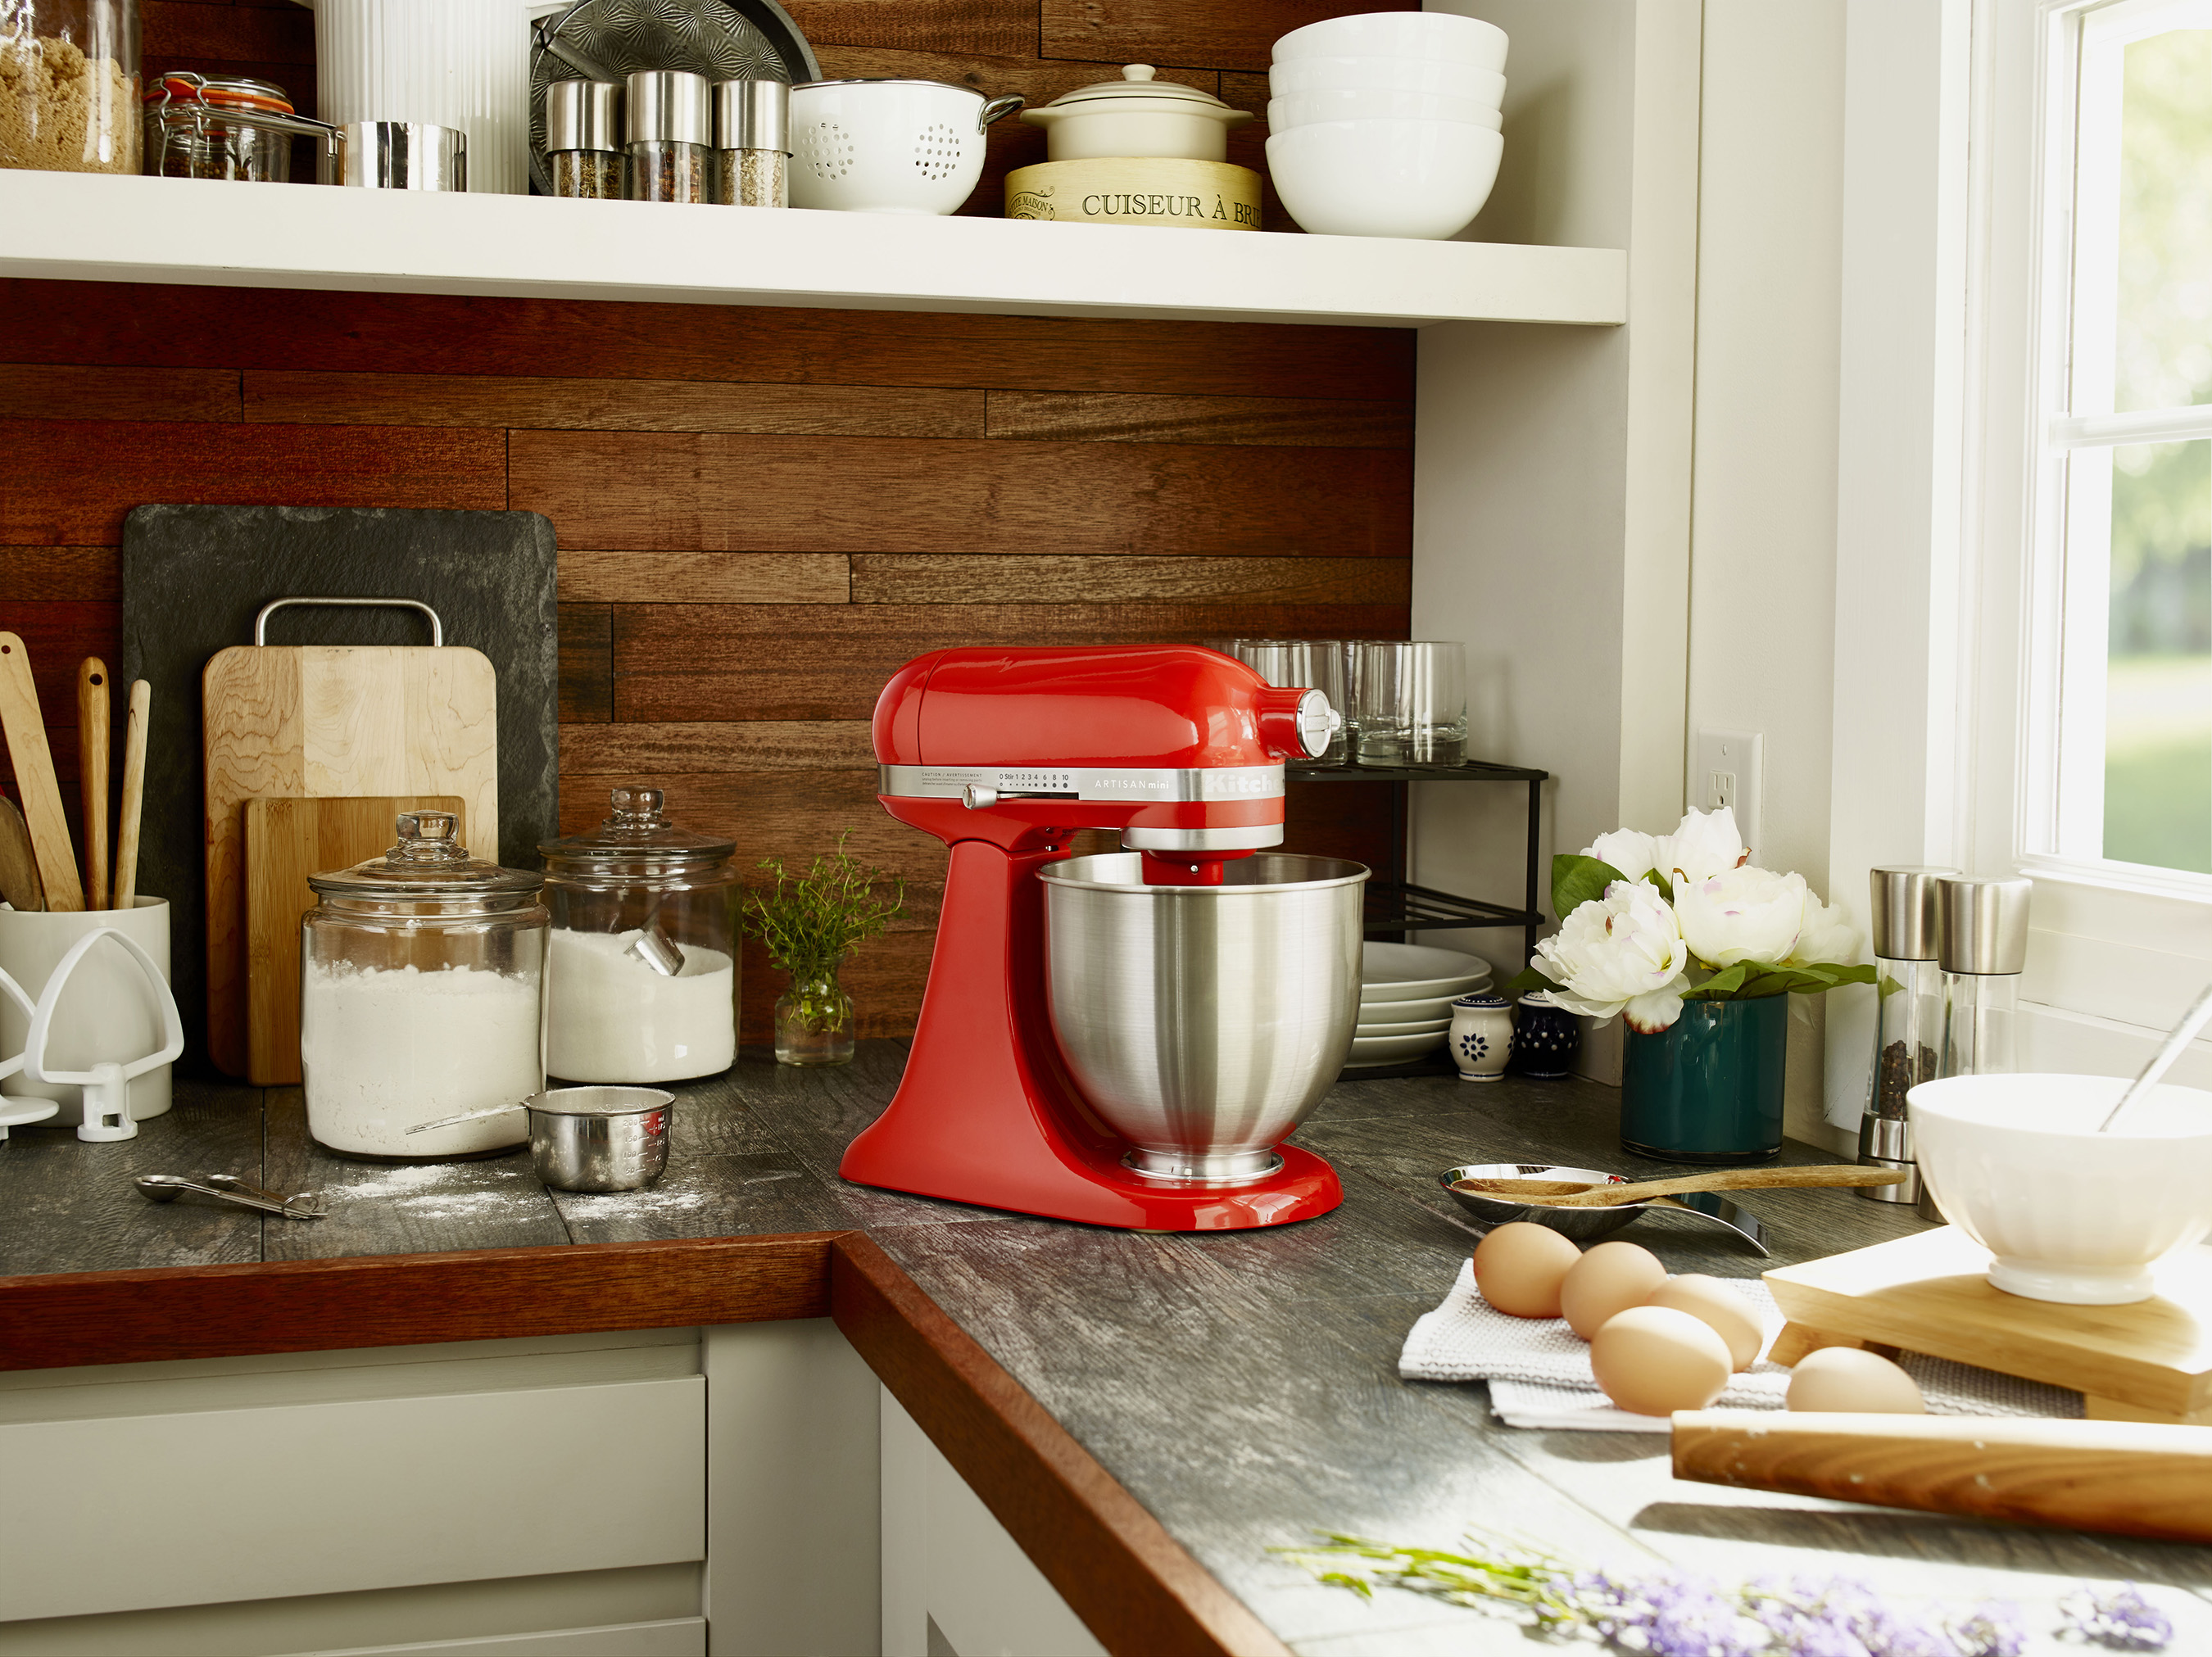 Offering the same power and performance as the brand’s ClassicTM Stand Mixer, the Artisan Mini mixer features a 3.5-quart capacity and is 20% smaller and 25% lighter.